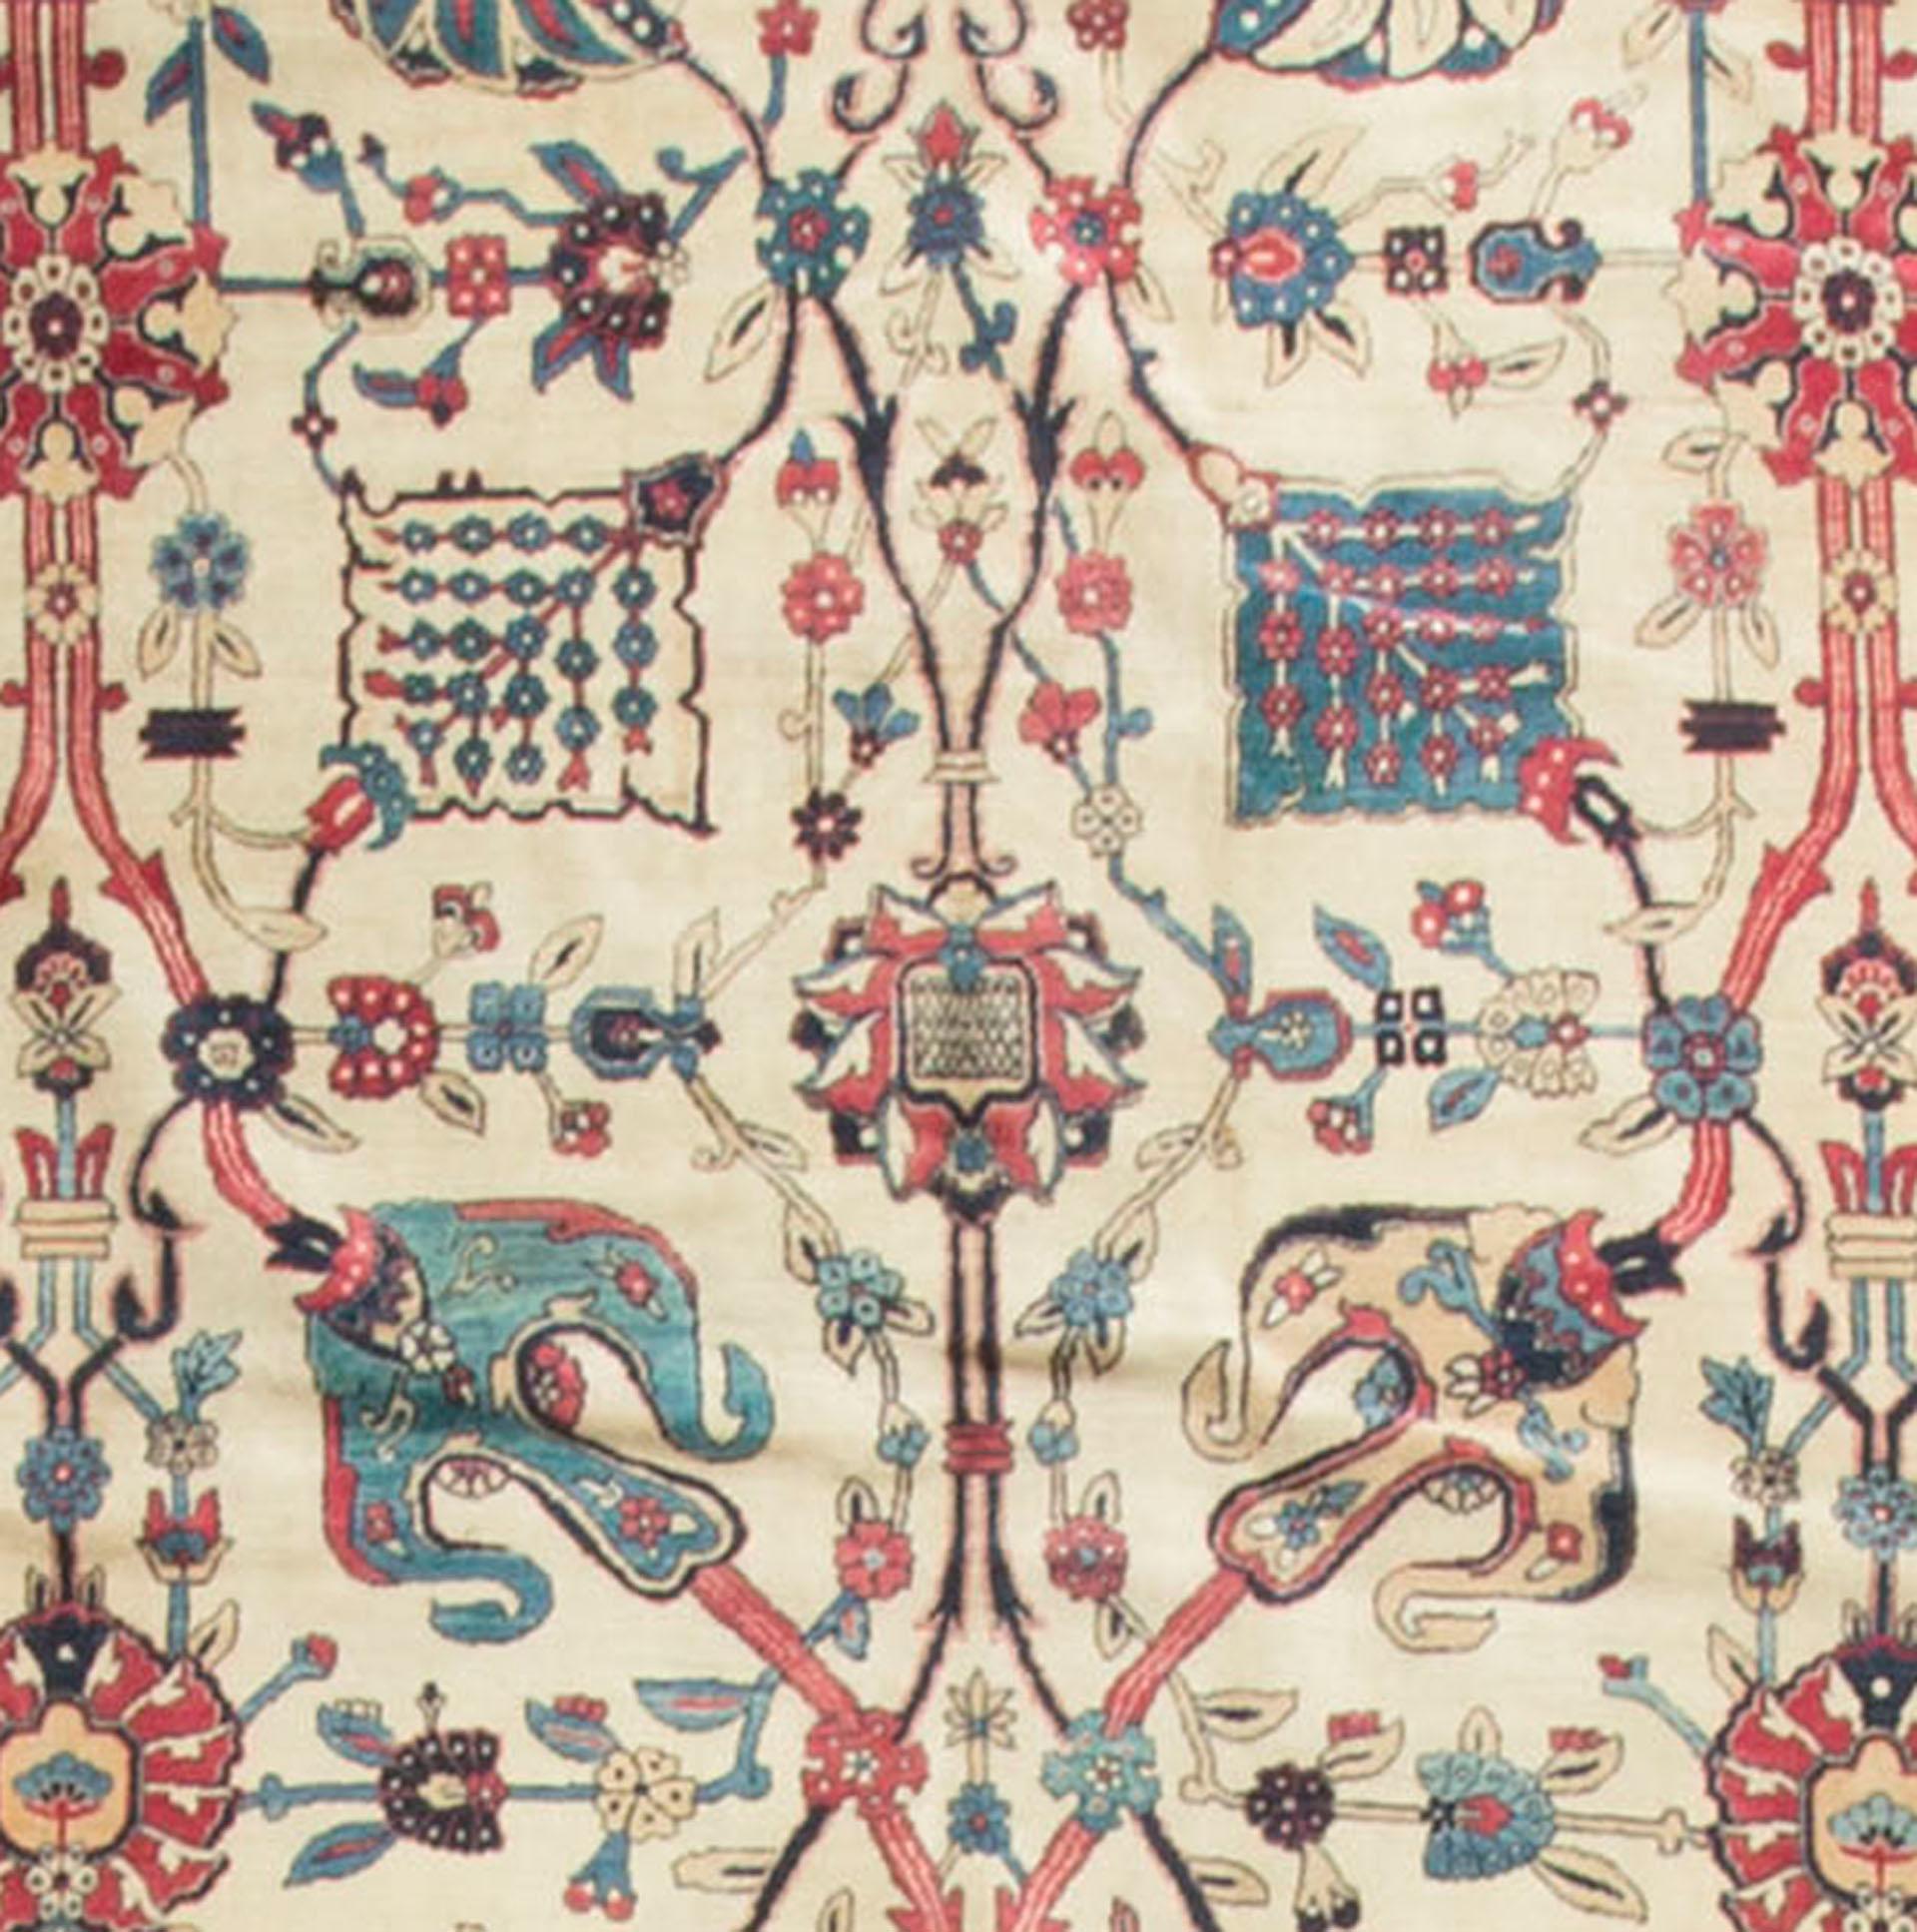 Antique Persian Kerman Lavar rug carpet, circa 1900, measures: 9'8 x 11'8. A lovely open ivory field with floral designs, entwined by a soft vine theme, weaving between the motifs. All enclosed within an ivory border and soft blue guard borders to